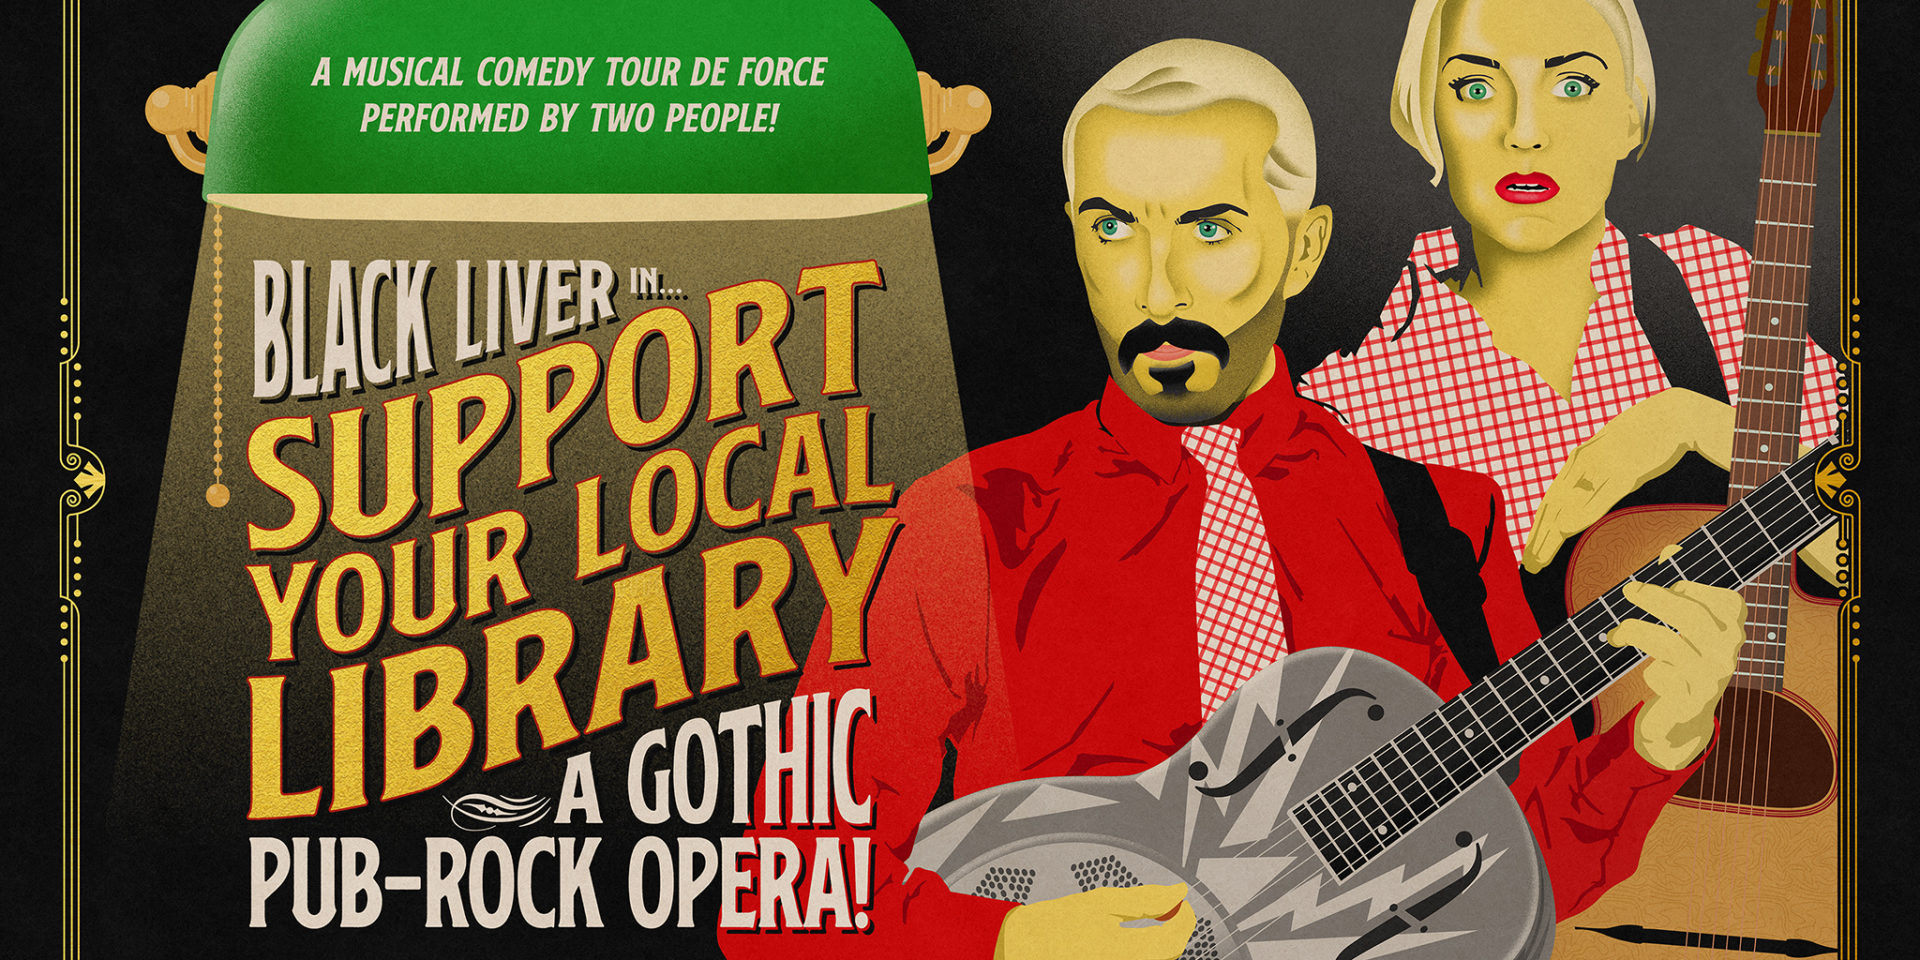 Support Your Local Library: A Gothic/Pub Rock Opera!